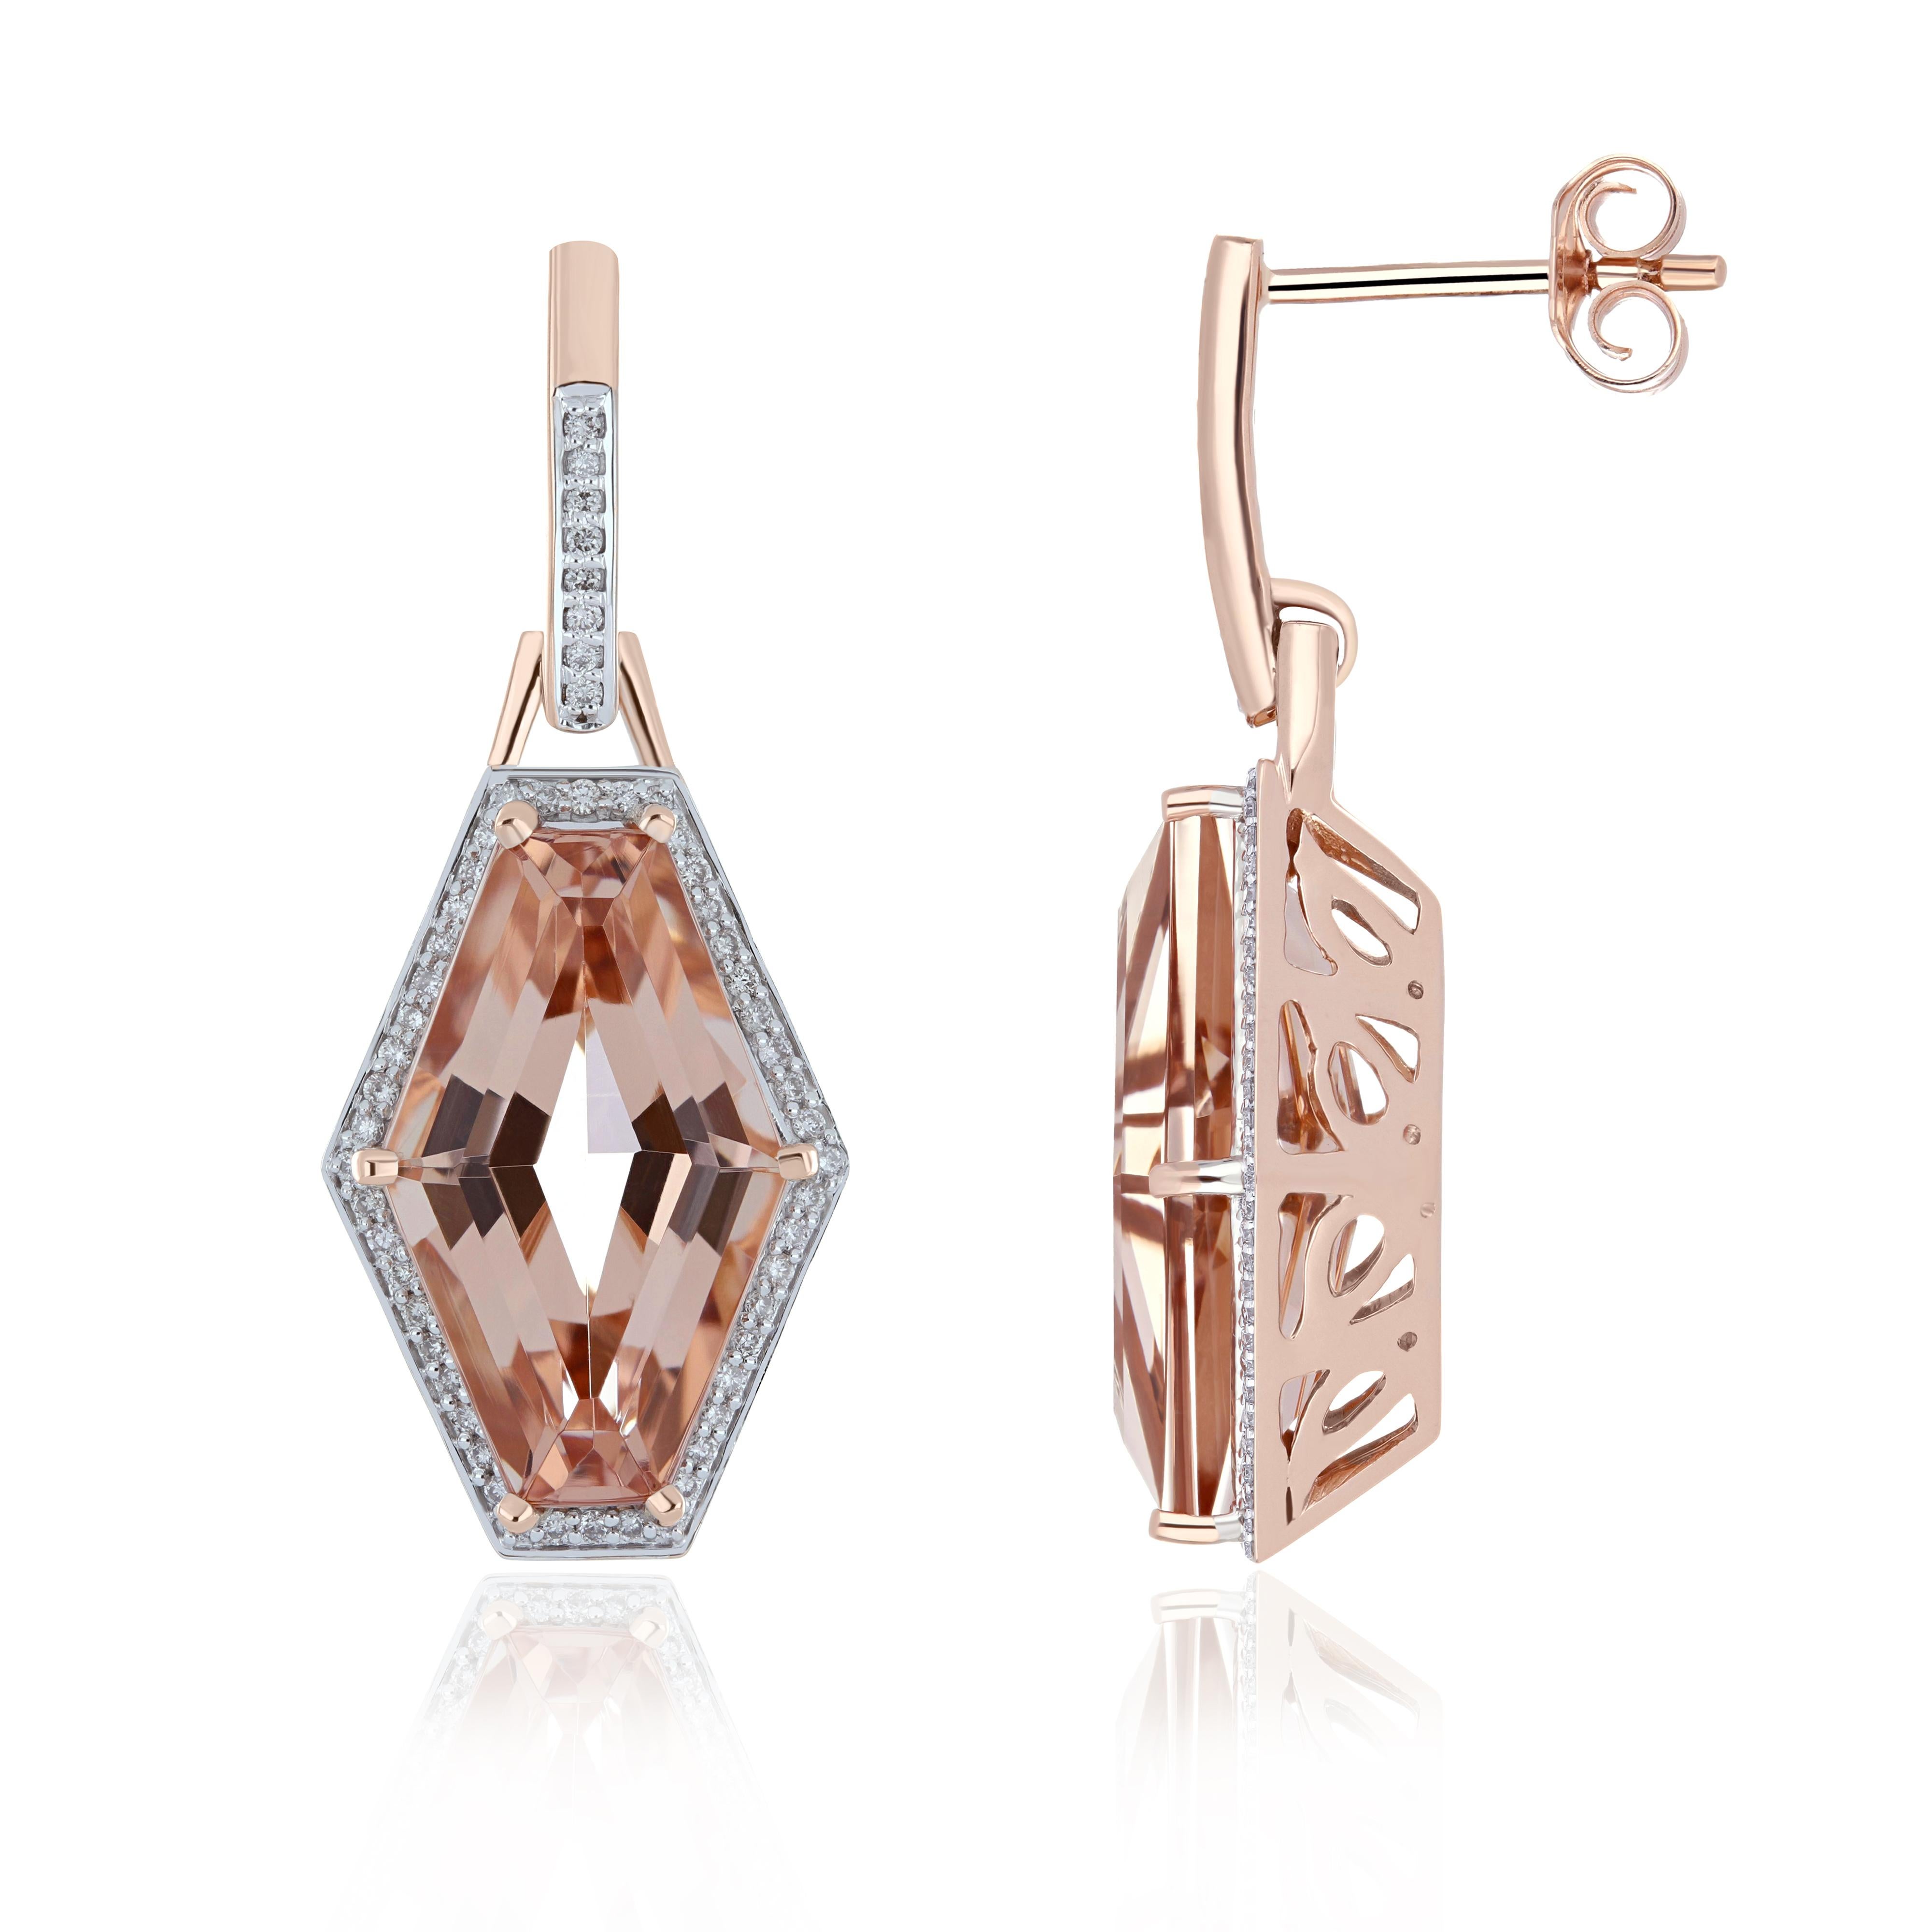 Elegant and exquisitely detailed Cocktail 14K dangle Earrings, center set with exclusively hand cut 9.9 Cts. (approx.) Fancy Hexagon Morganite. Surrounded with Diamonds, weighing approx. 0.3 ct. Beautifully Hand crafted in 14 Karat Rose Gold.

Stone